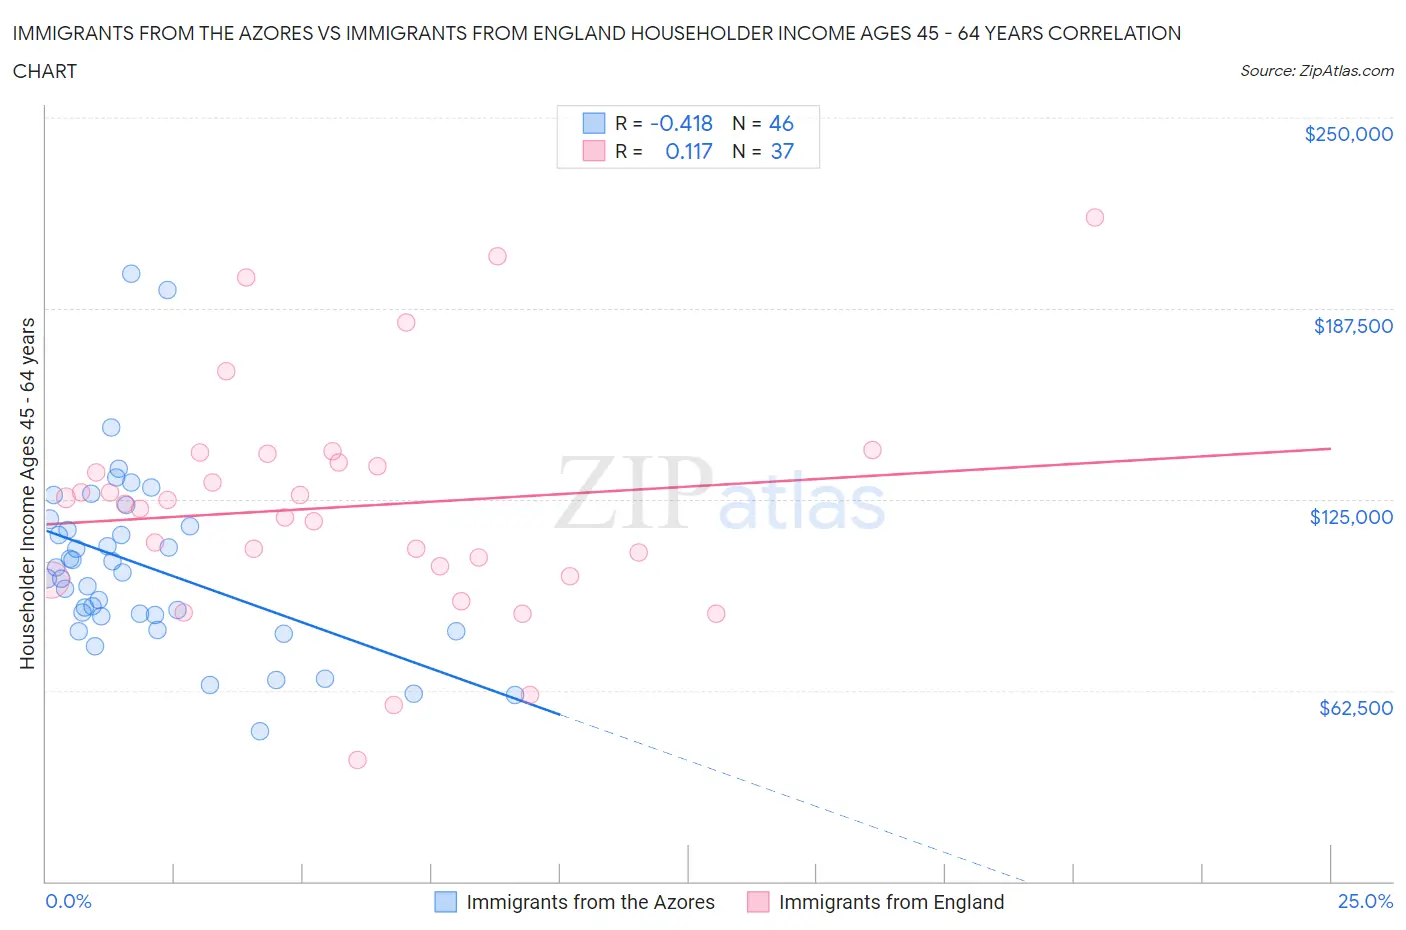 Immigrants from the Azores vs Immigrants from England Householder Income Ages 45 - 64 years